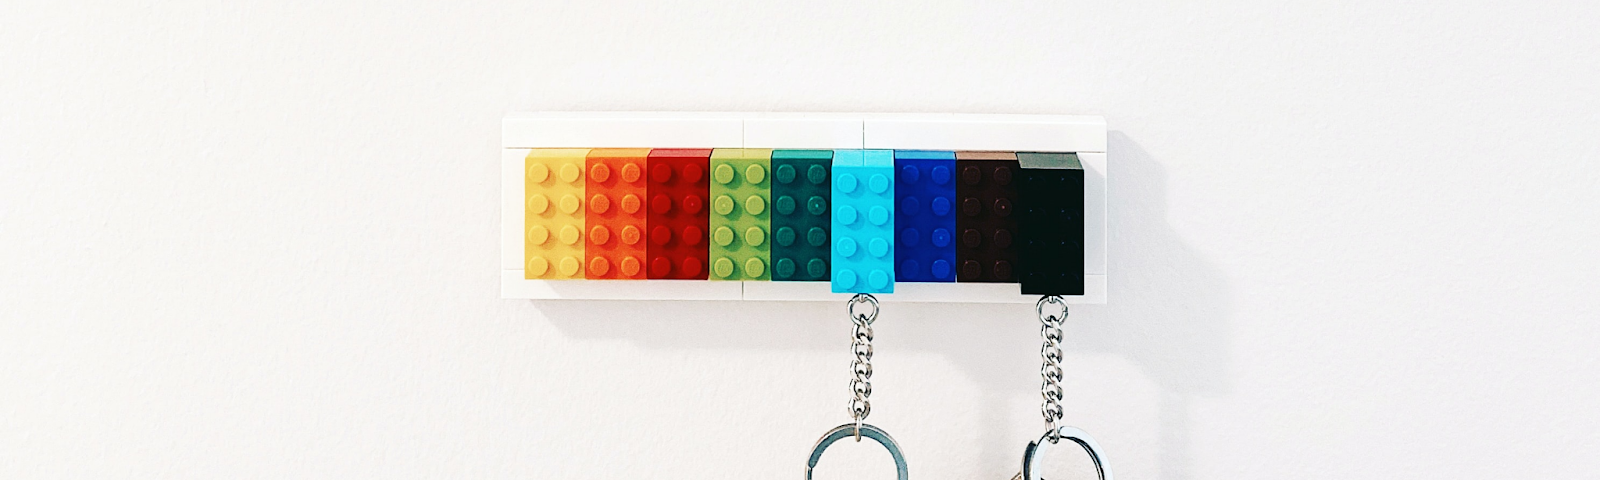 A couple of keys are suspended  from a row of colorful legos that form a key hook.